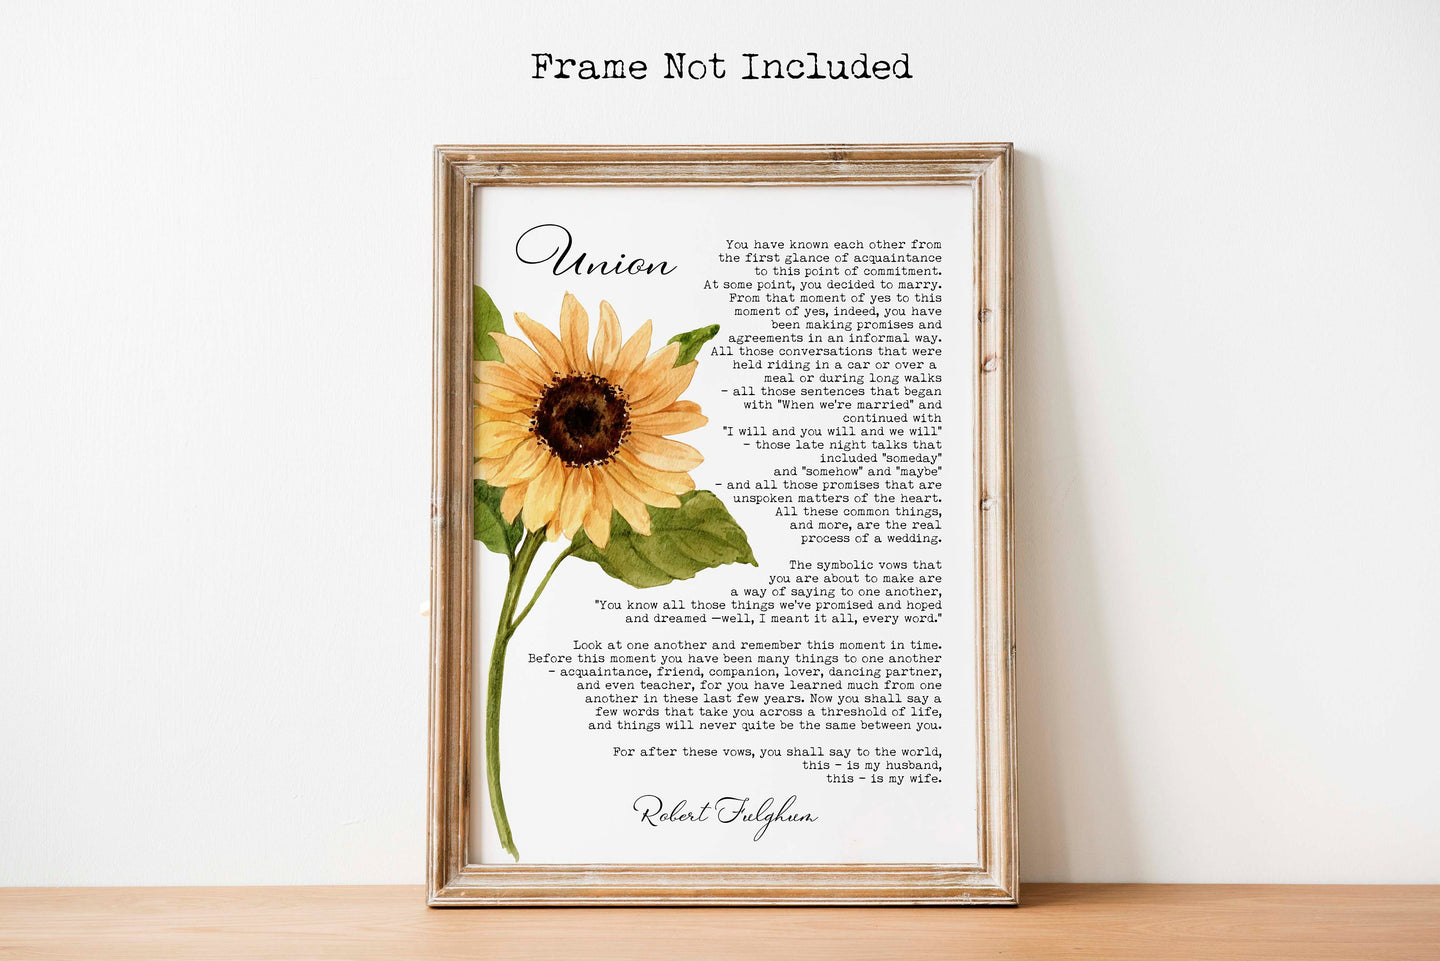 Union By Robert Fulghum - Wedding poem wall art - Anniversary Gift Poetry Poster Print - Full Poem - Physical print without frame